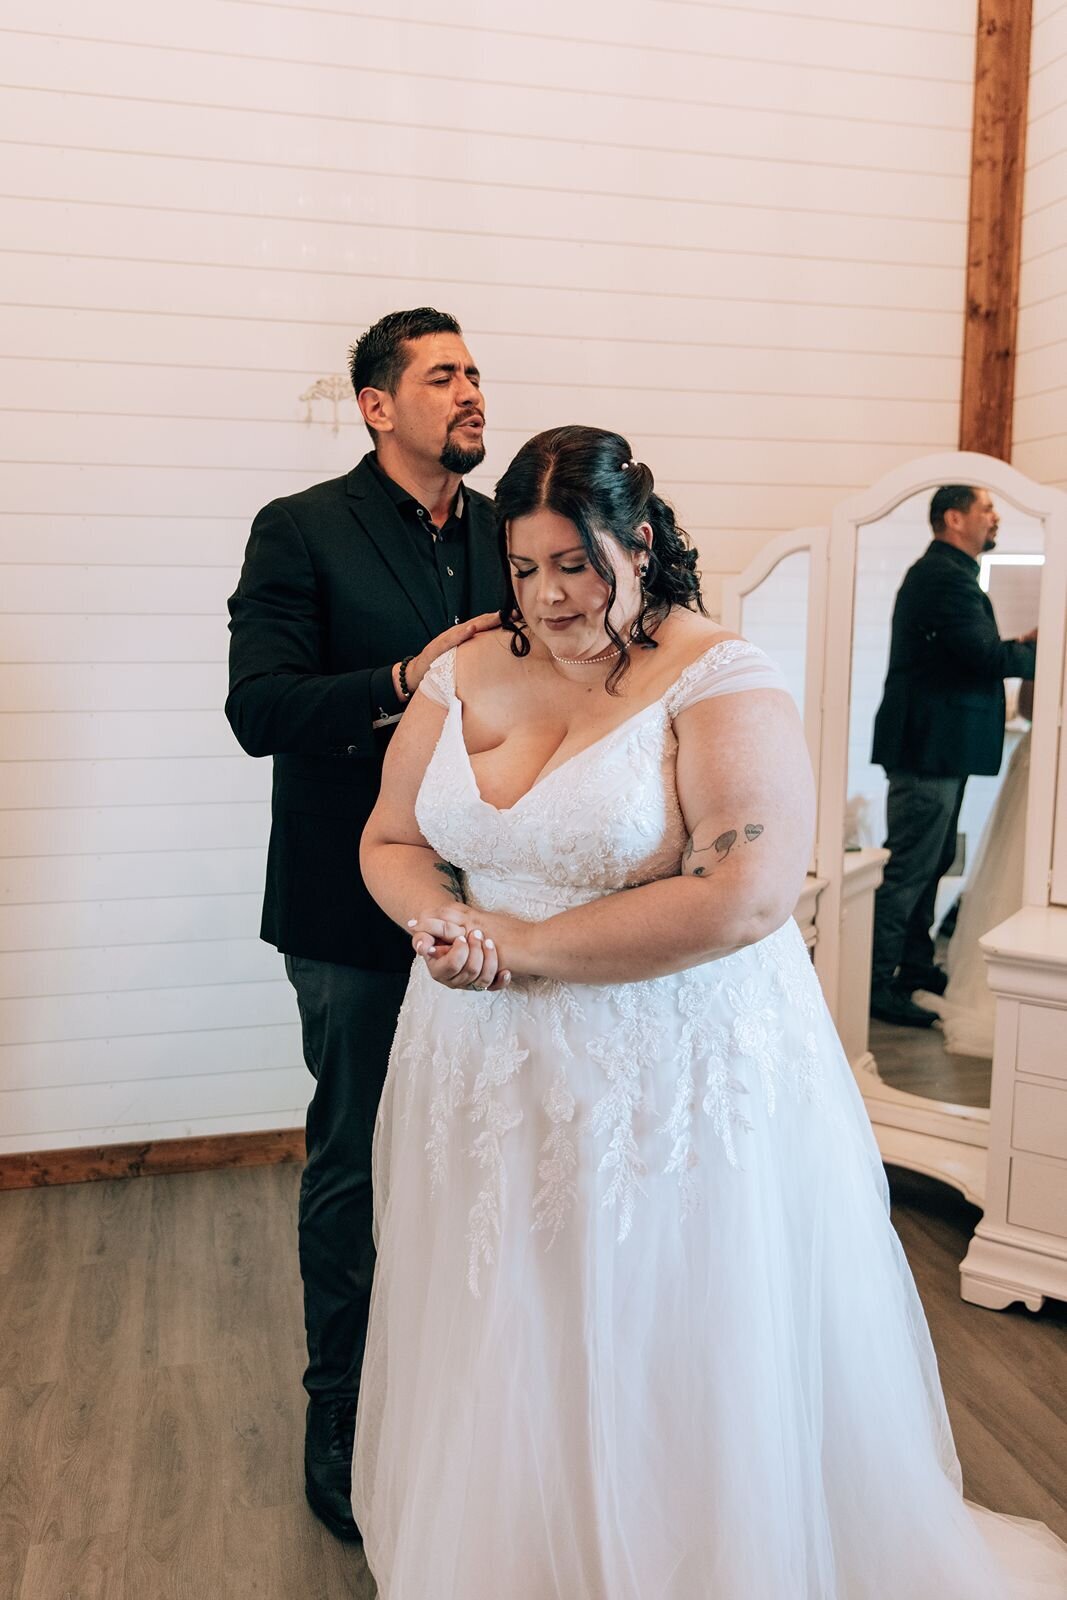 pastor prays with the bride before the wedding ceremony